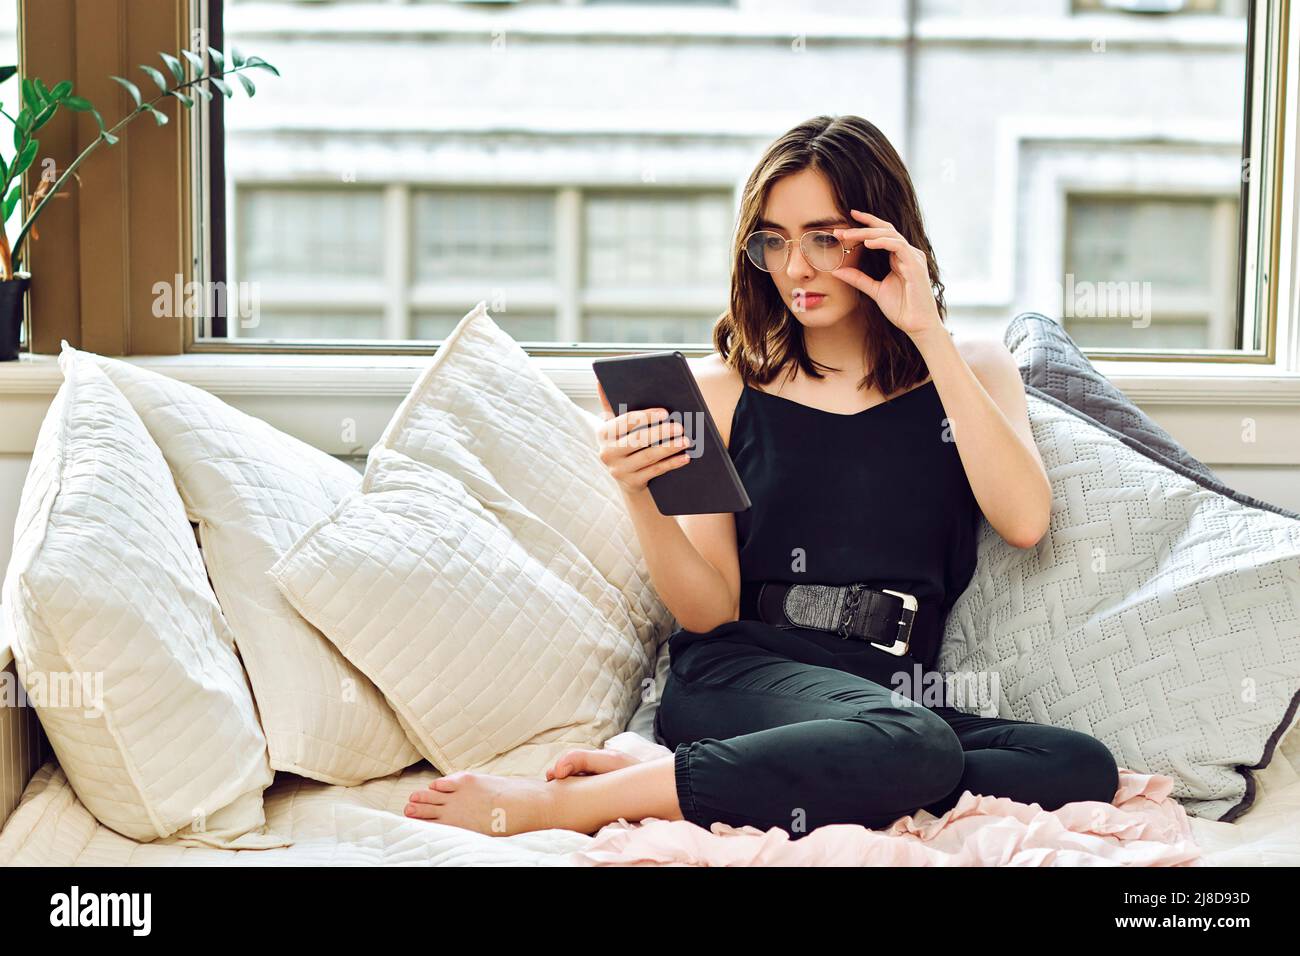 thoughtful beautiful young adult woman with eyeglasses reading tablet on sofa indoors Stock Photo